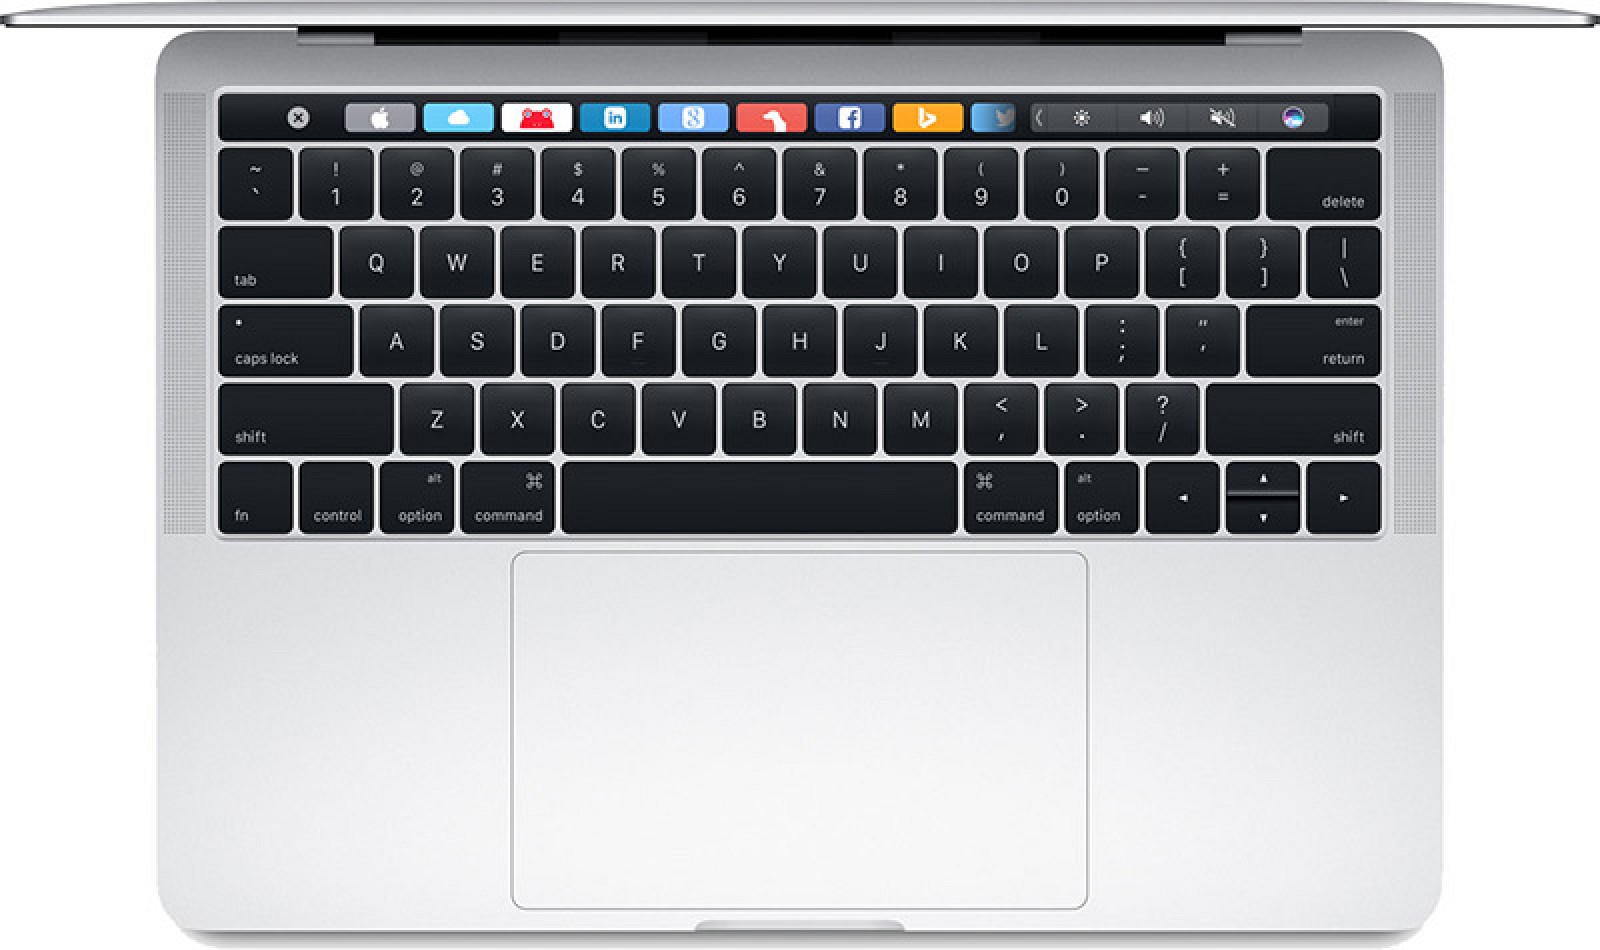 Kuo: Apple to Use New Scissor Switch Keyboard in Future MacBooks, Starting With 2019 MacBook Air Refresh